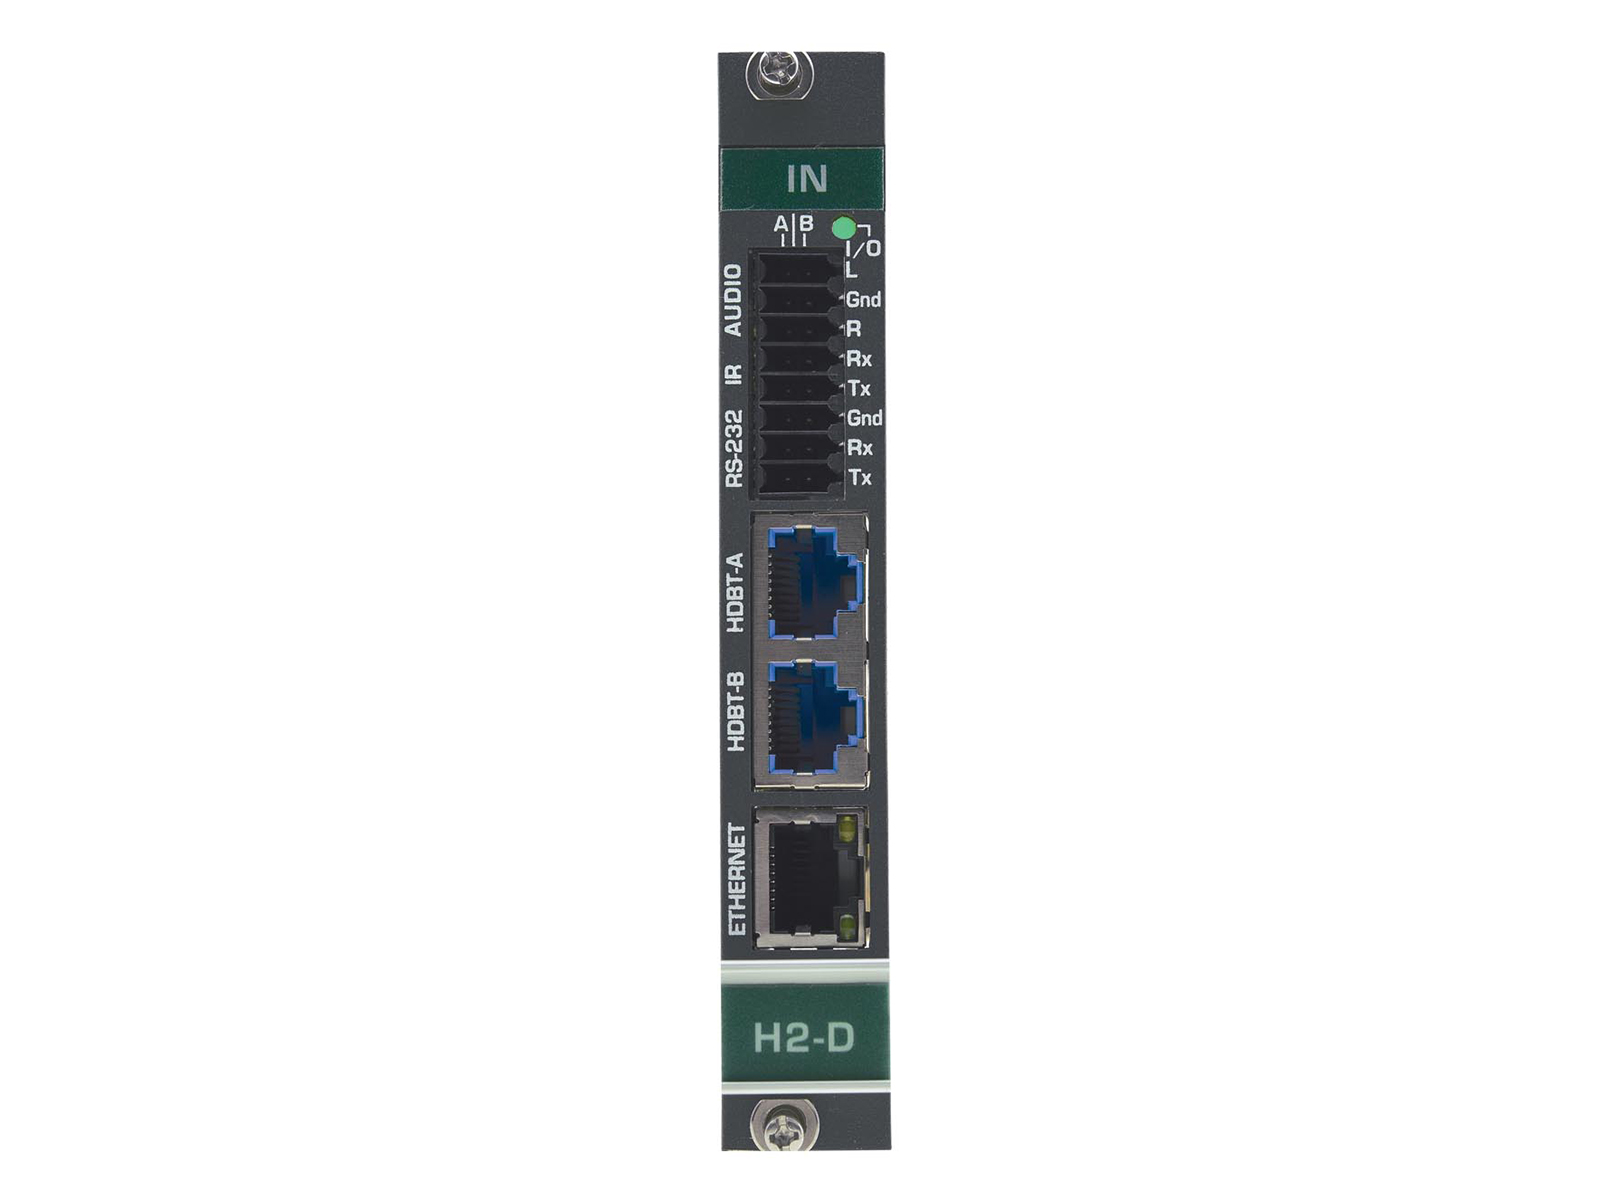 DTAXRD2-IN2-F34 2-Channel 4K HDR HDMI over Extended Reach HDBaseT Input Card with Analog Audio by Kramer